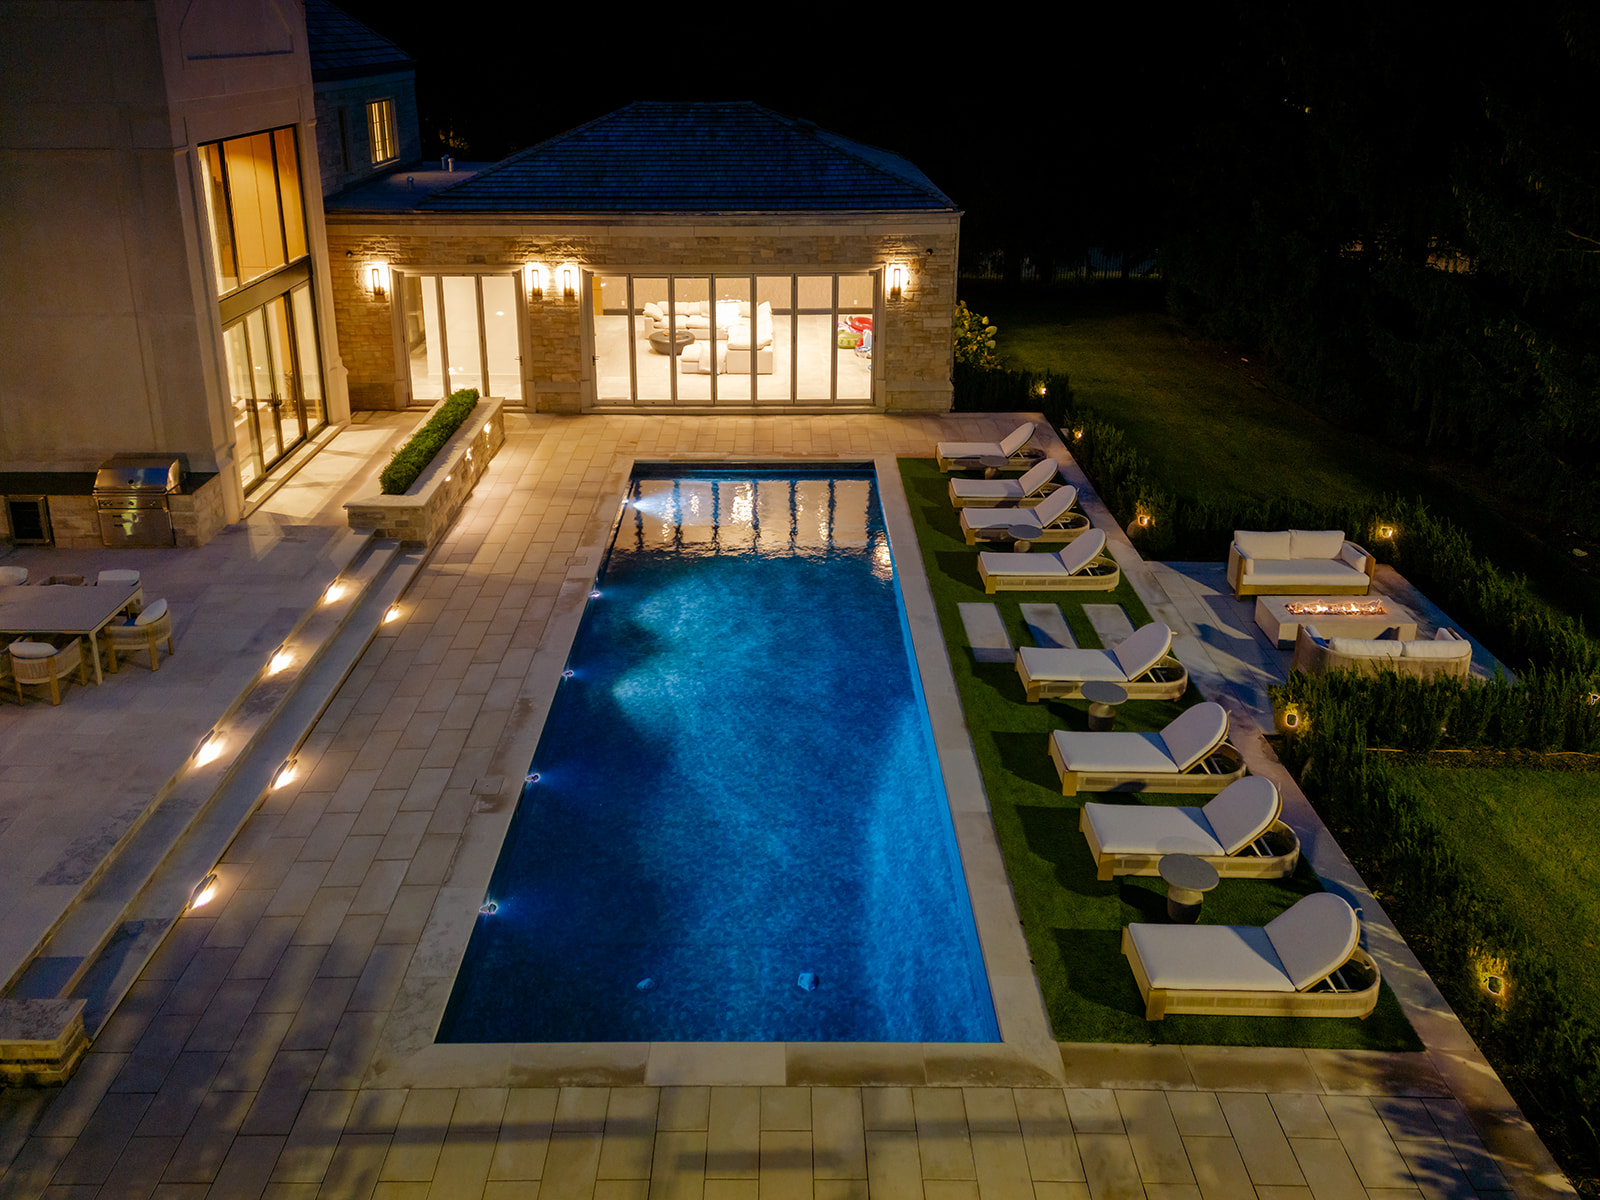 A done-shot of the backyard with the inground pool and the house lit up.